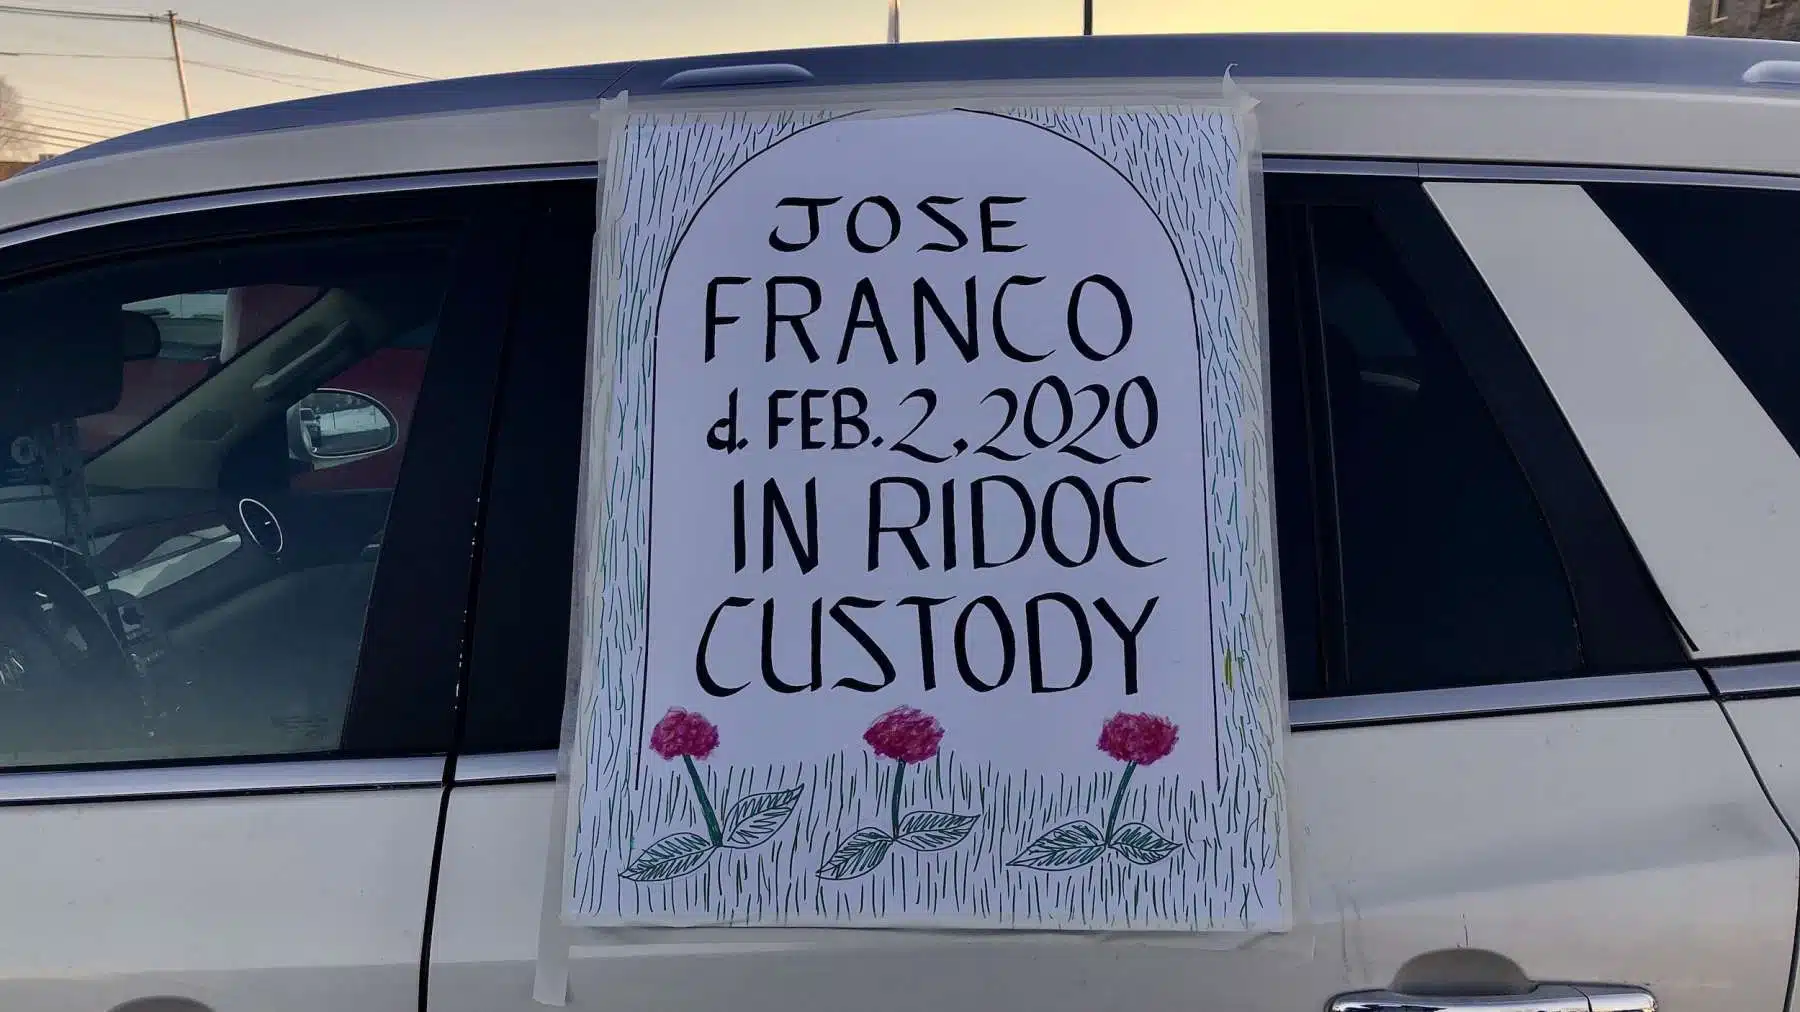 A car rally in memory of Jose Franco, who died in RIDOC custody